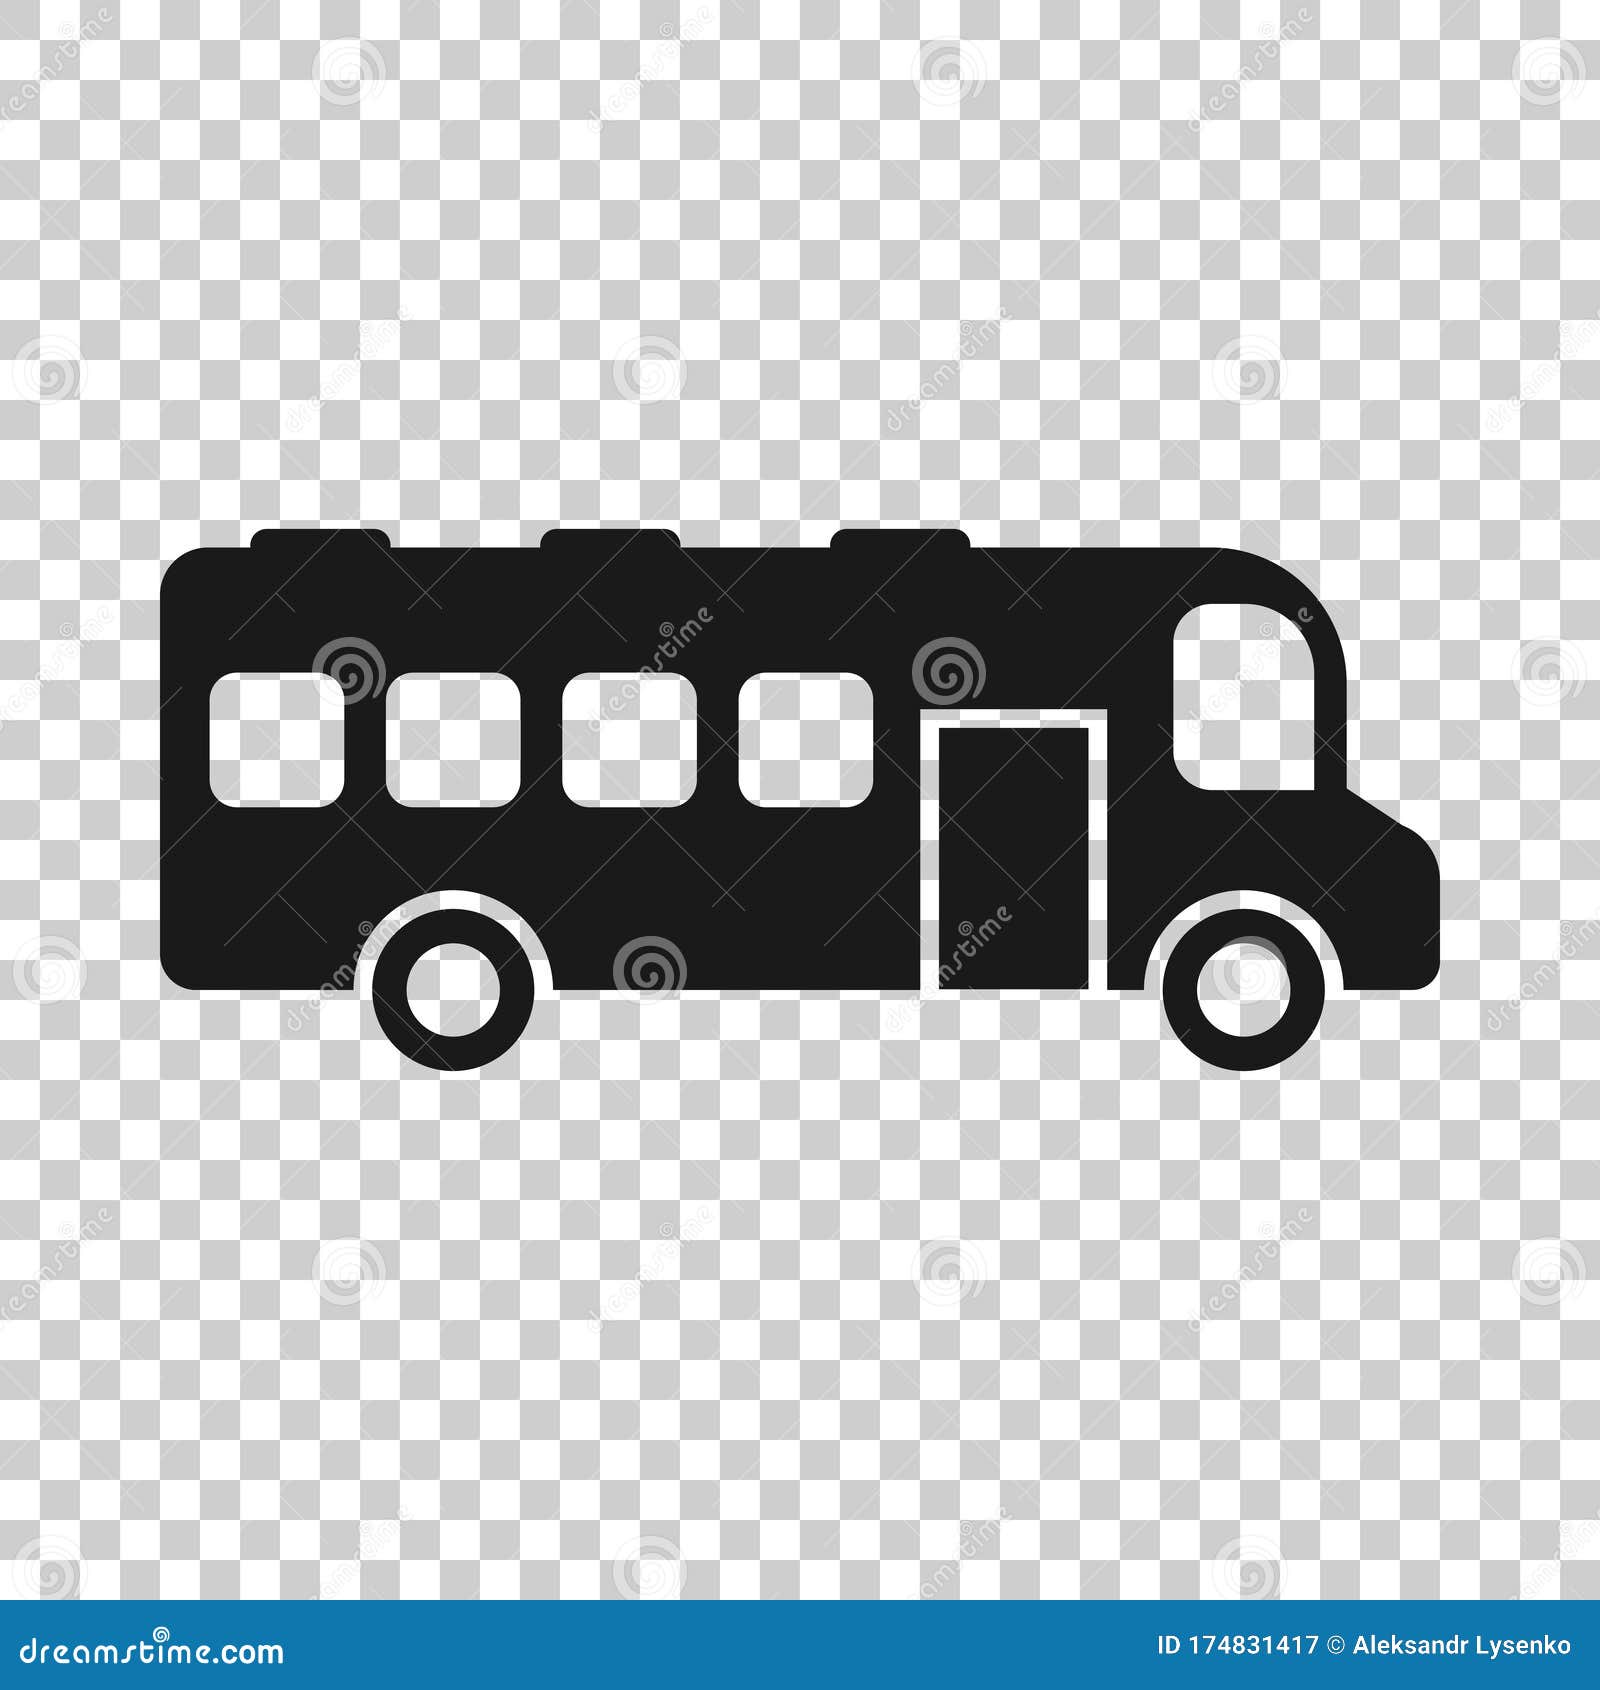 bus icon in flat style. coach   on white  background. autobus vehicle business concept